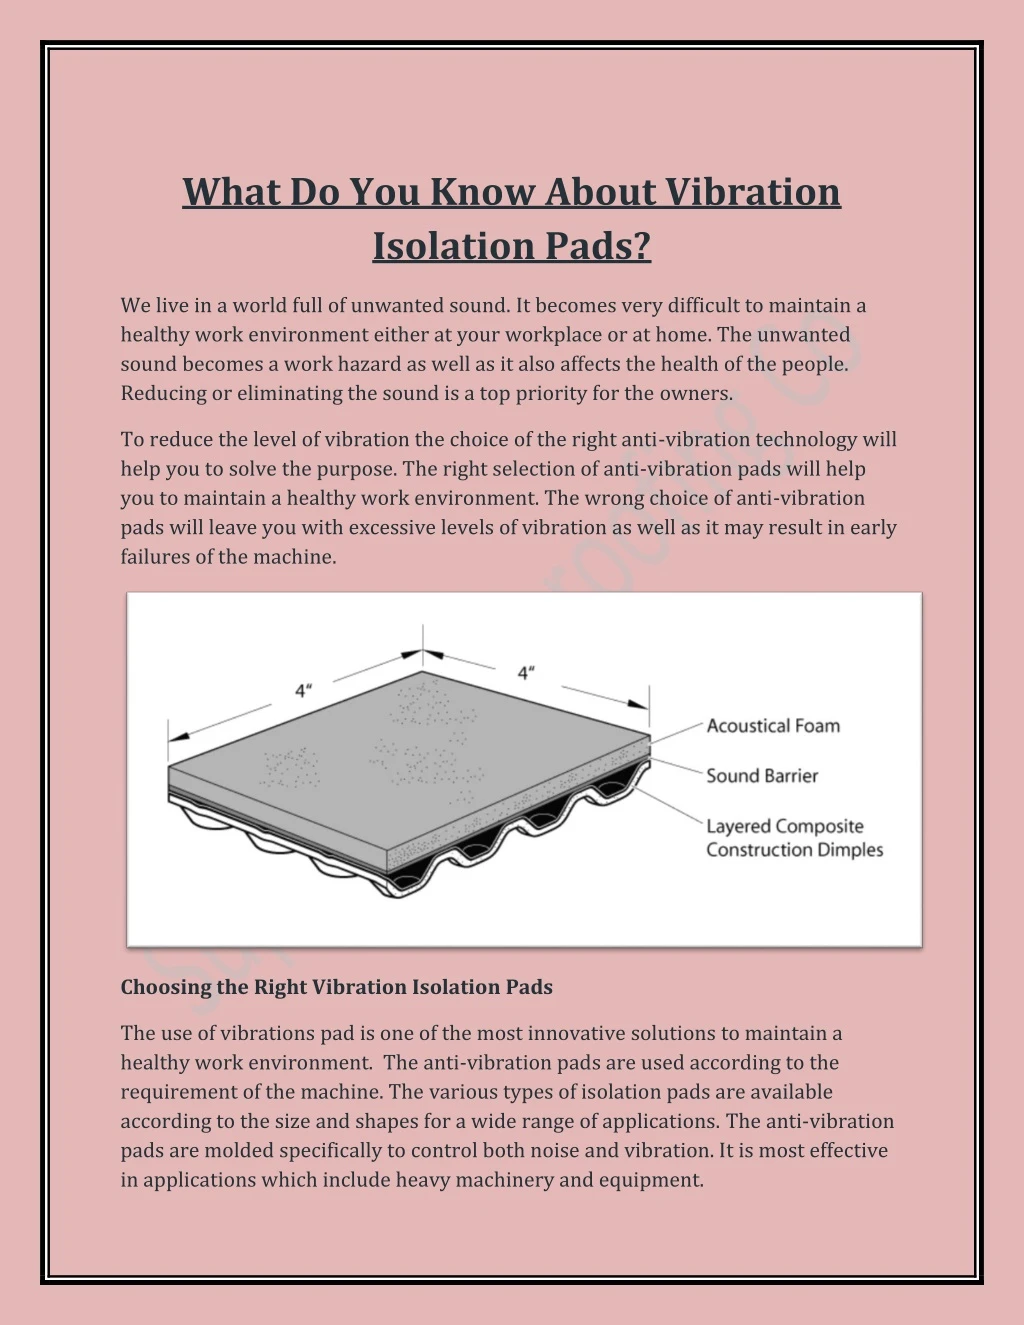 what do you know about vibration isolation pads